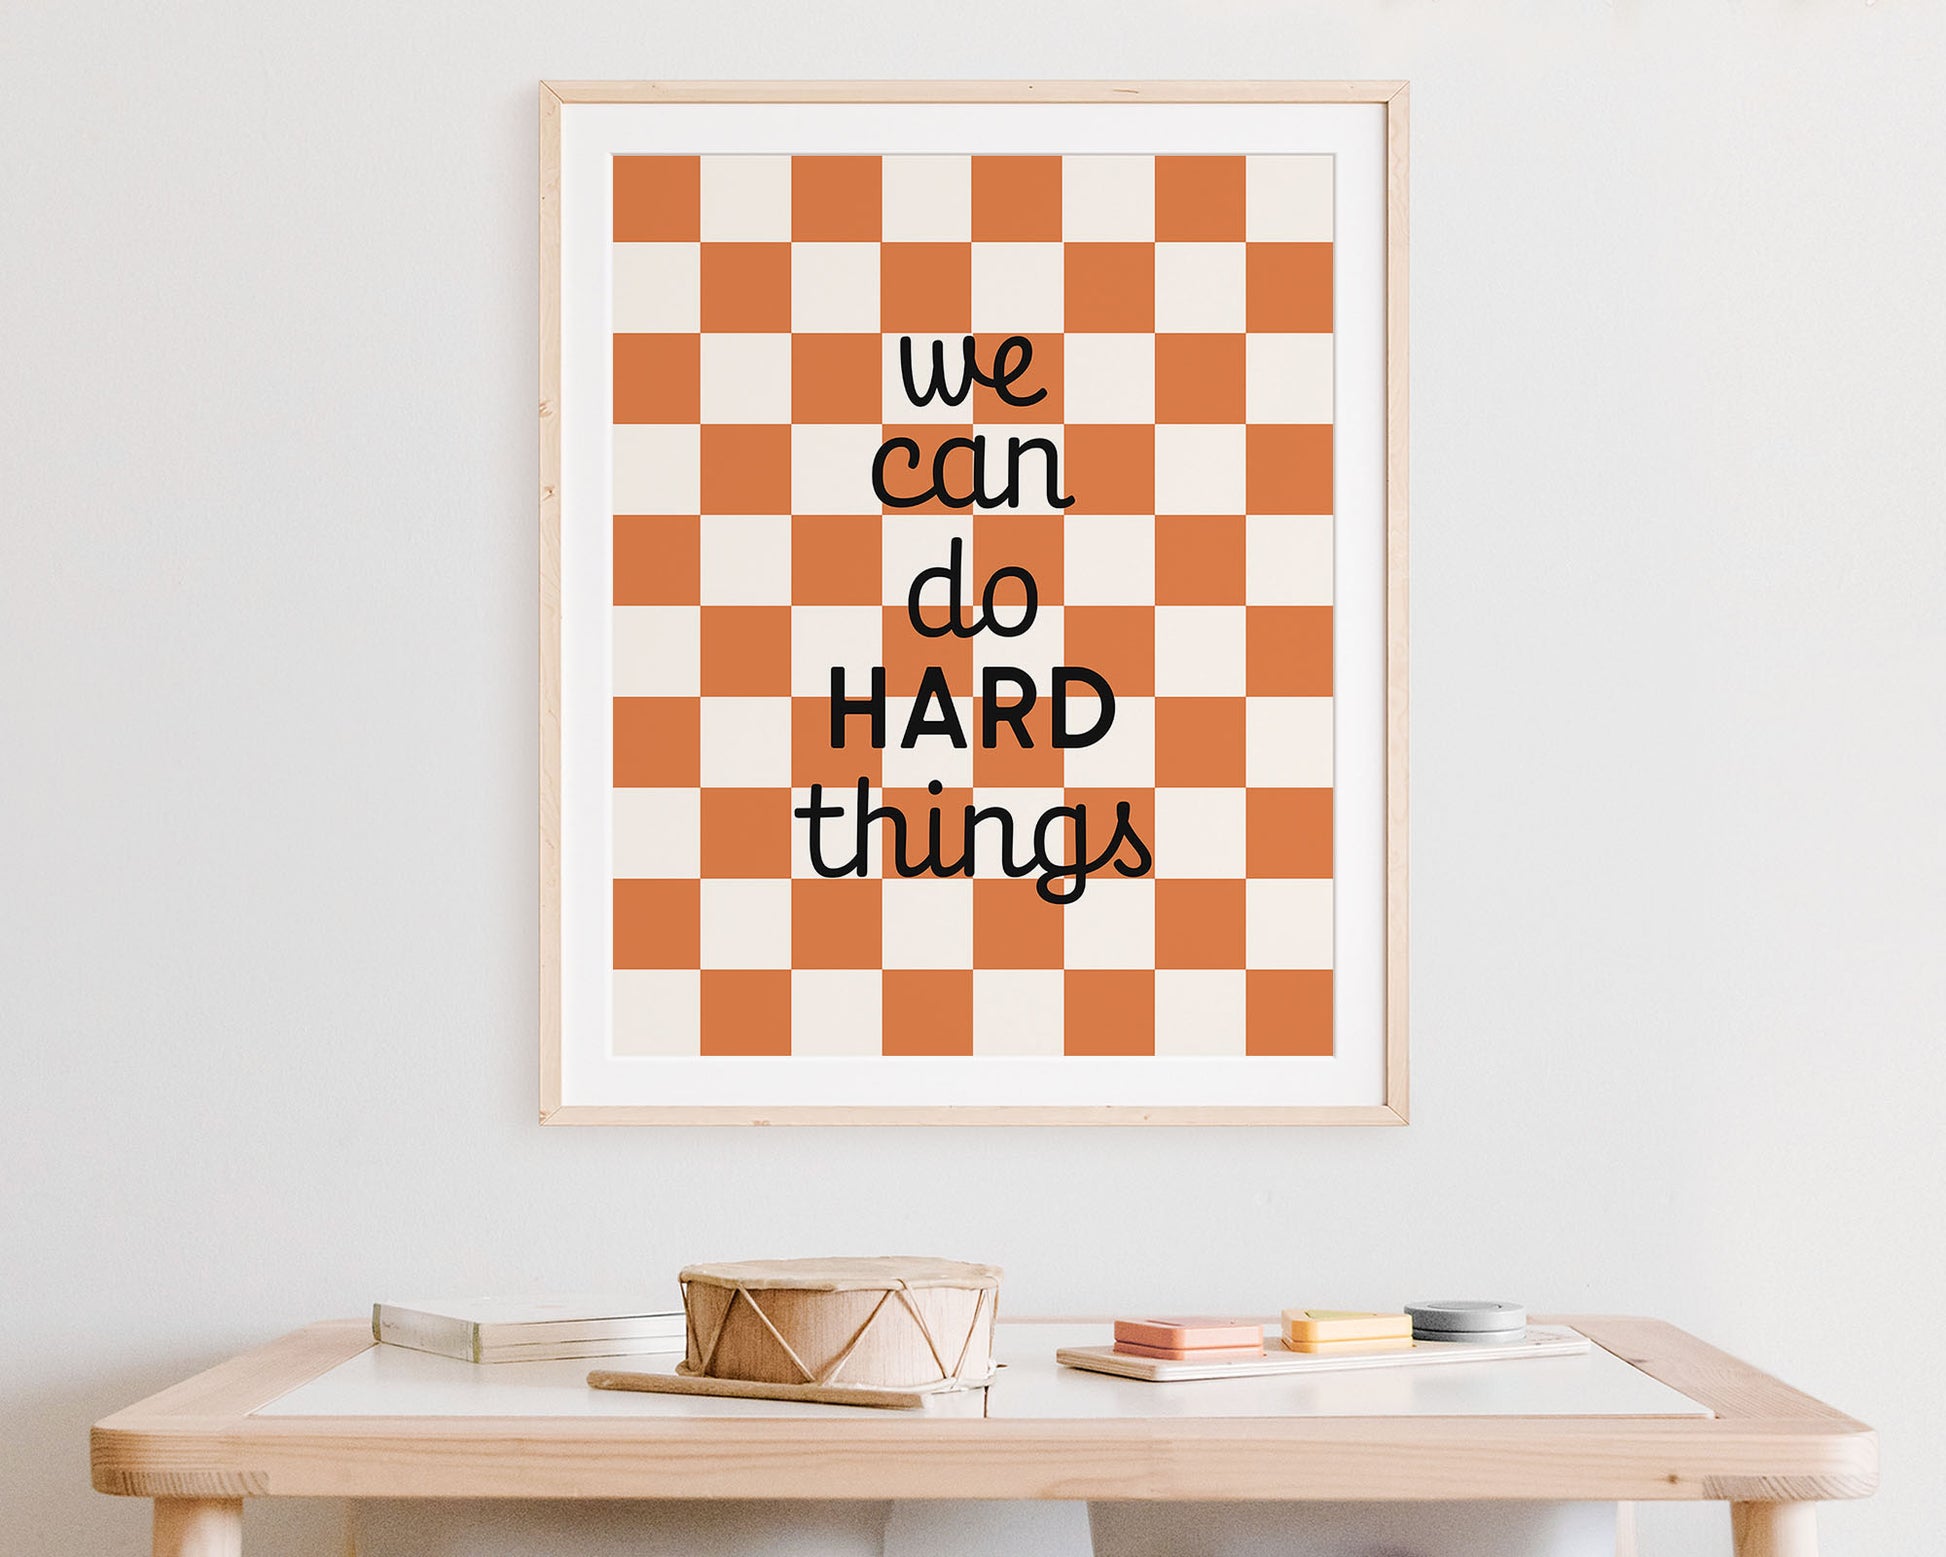 We Can Do Hard Things Instant Download Digital File featuring cursive script and block lettering in black on an orange and off white checkered background. Perfect for Baby Girls Nursery Decor, Toddler Boys Bedroom Decor or Little Kids Playroom Wall Art.